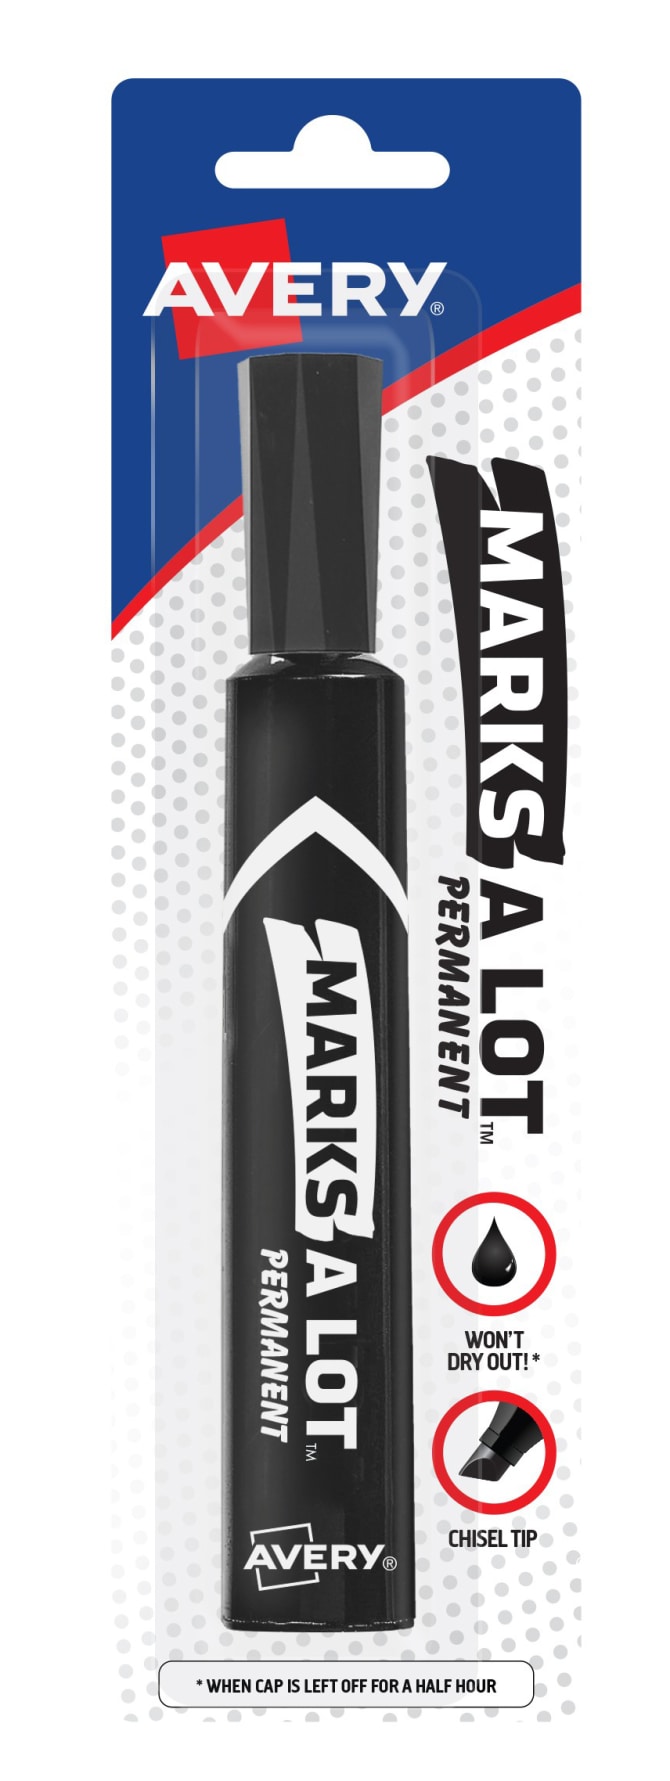 Avery Marks A Lot Permanent Markers Chisel Tip Large Desk Style Size Black  Pack Of 12 - Office Depot